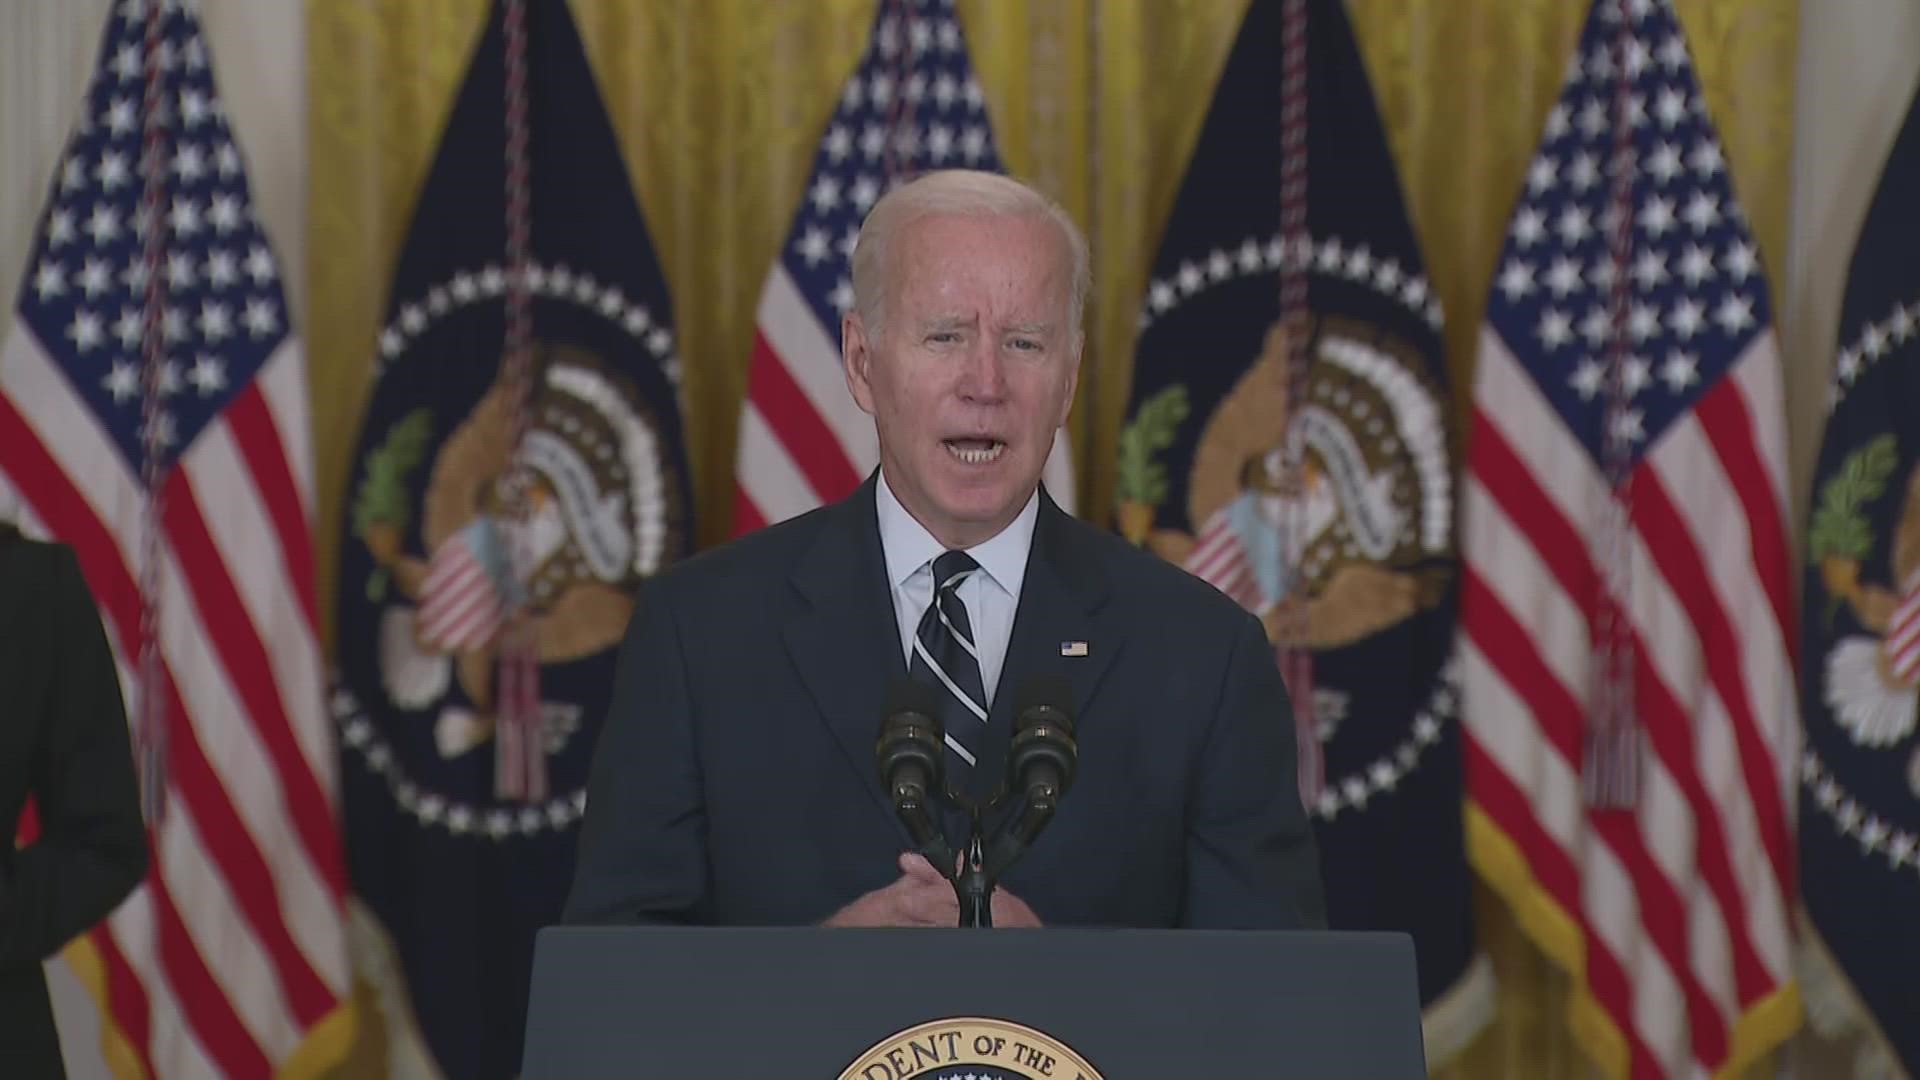 President Joe Biden laid out his infrastructure bill framework Thursday, saying that it will "invest in our nation and our people."